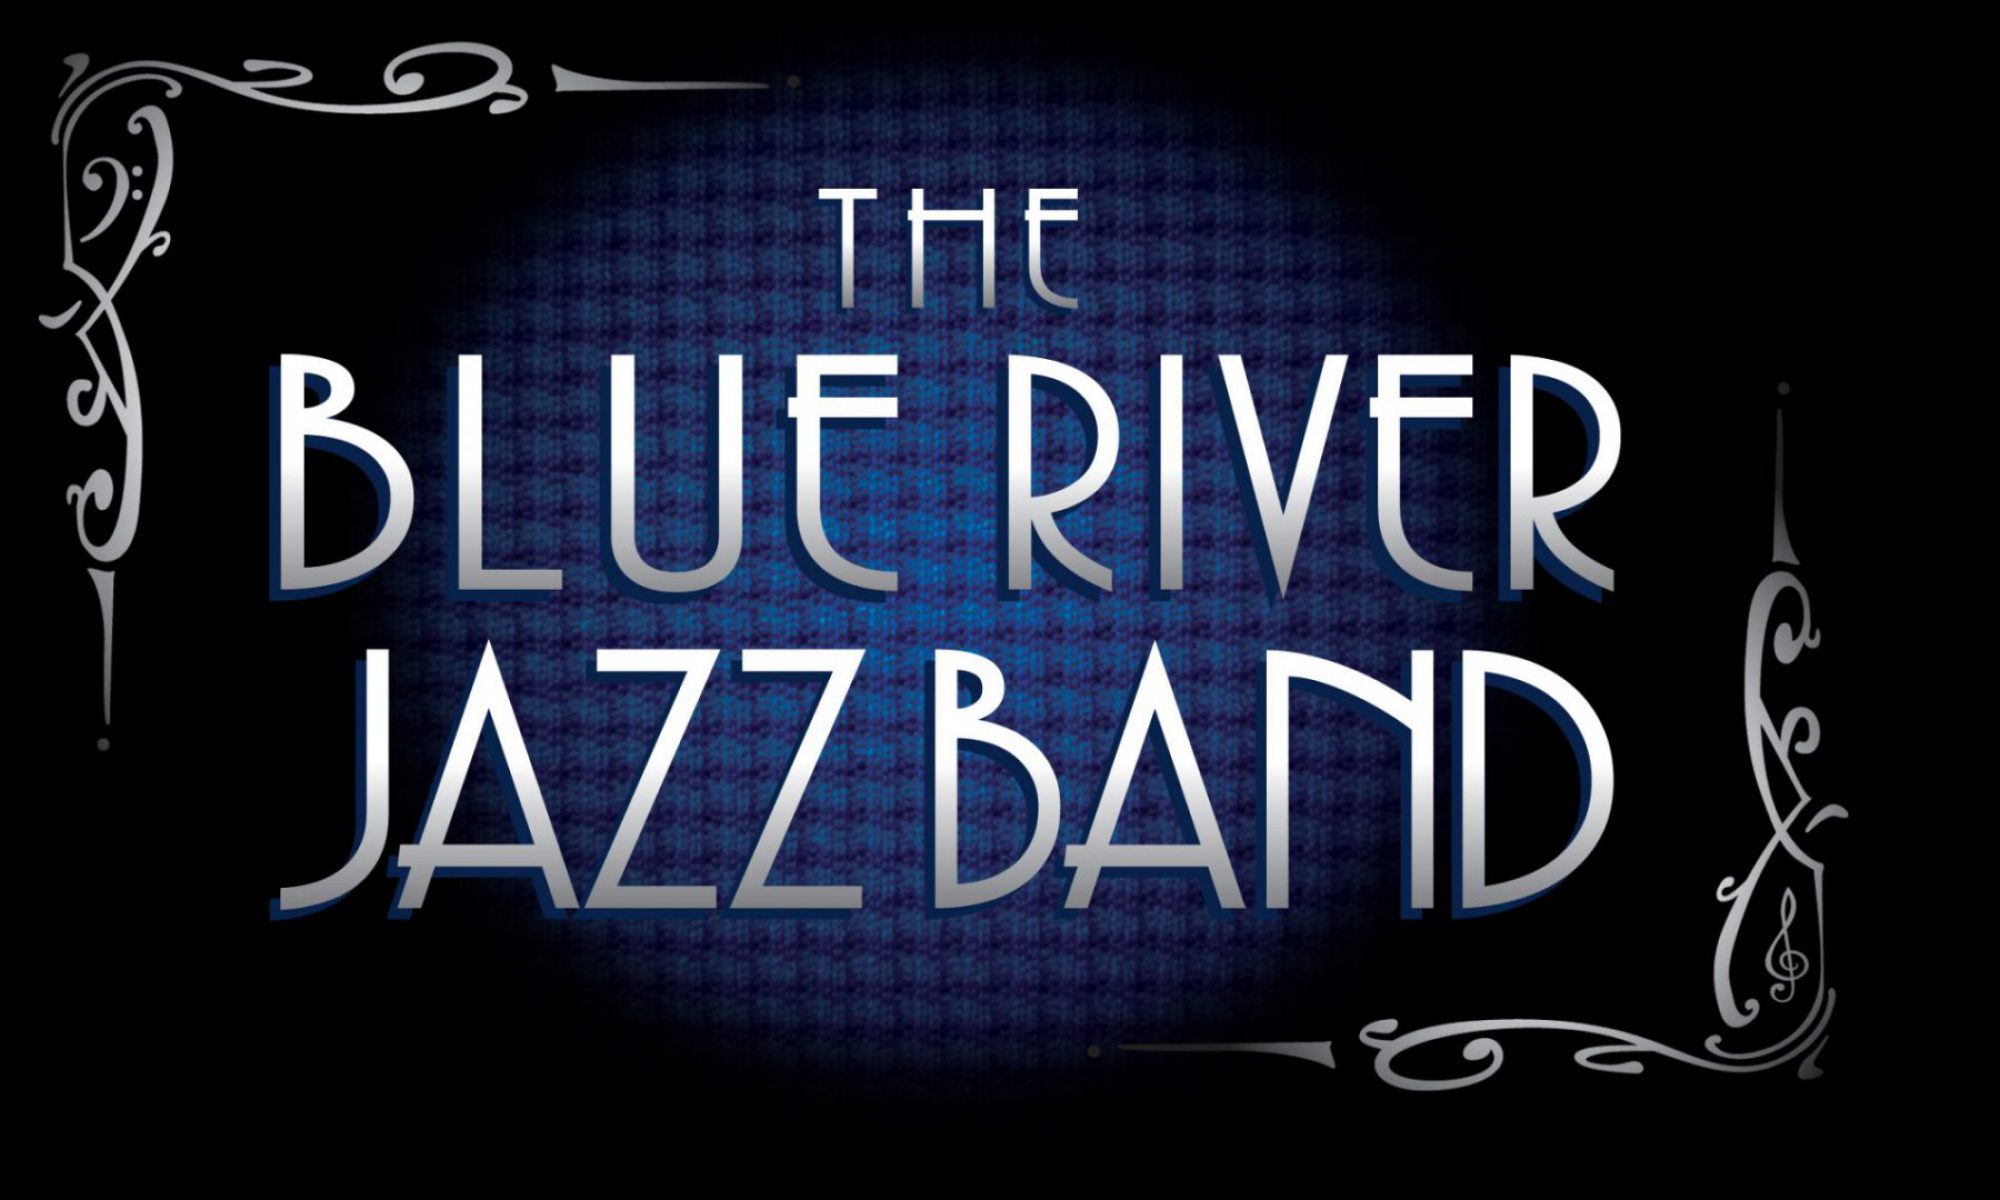 The Blue River Jazz Band